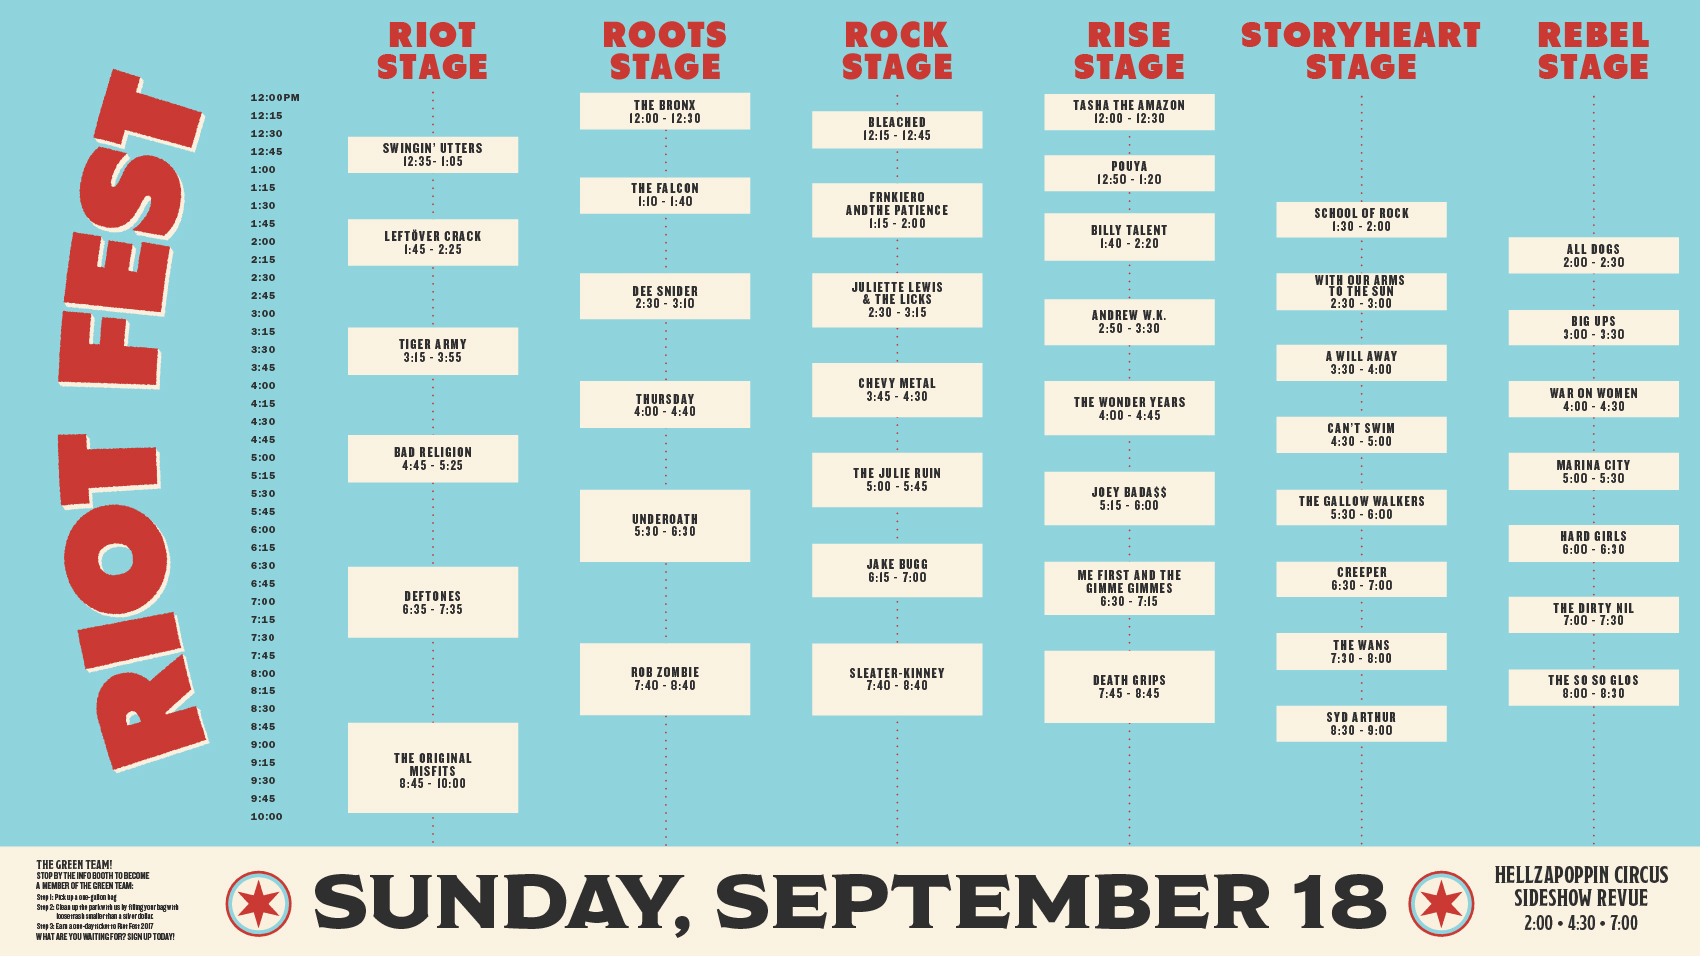 7 tough decisions on the Riot Fest 2016 schedule - RedEye